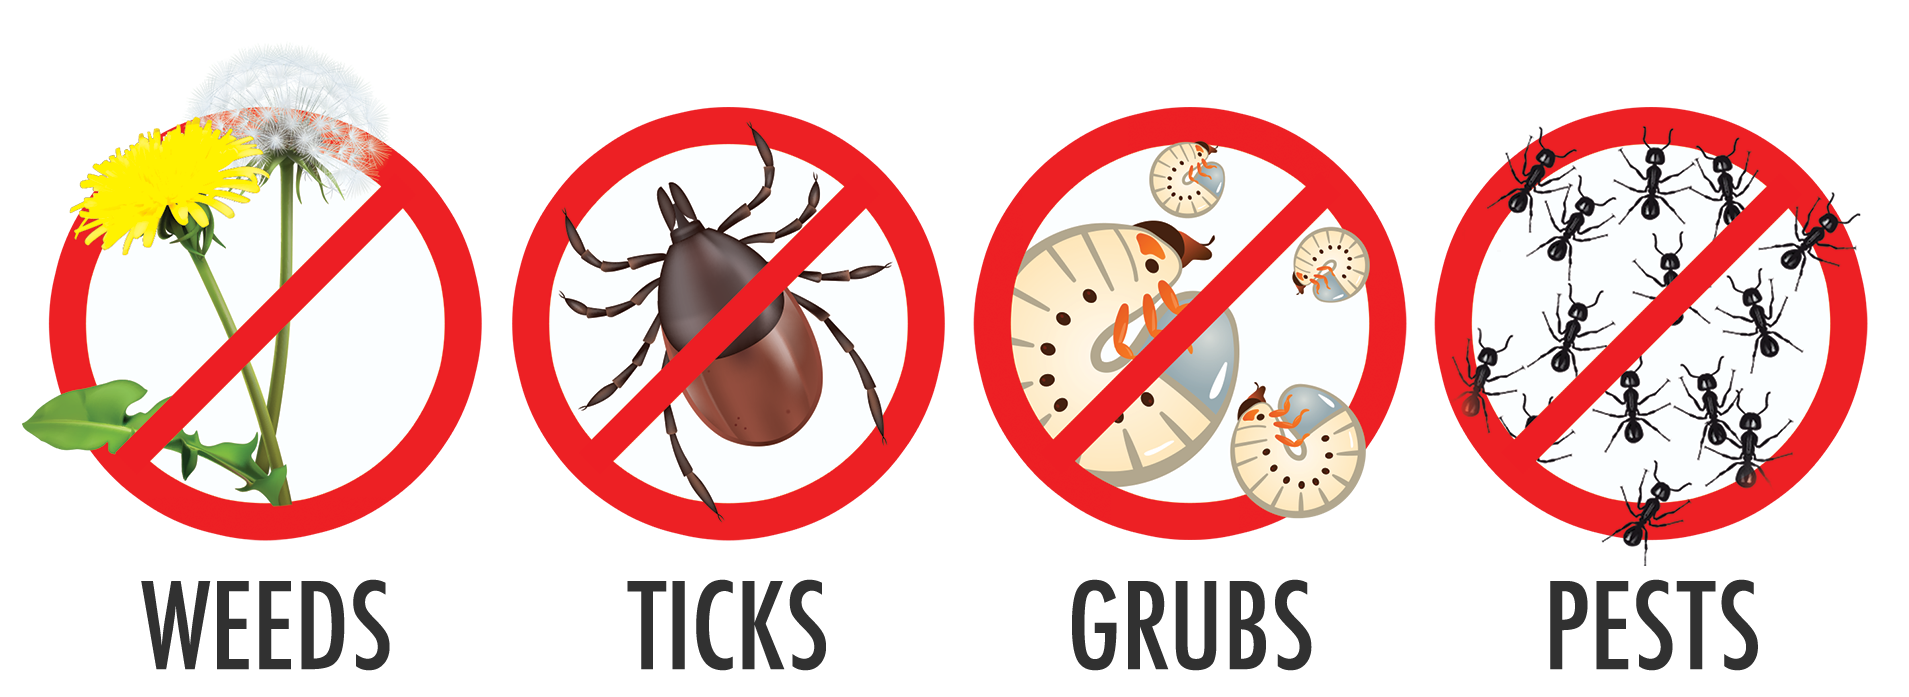 Icon set - Kill weeds, ticks, grubs, and other pests like ants